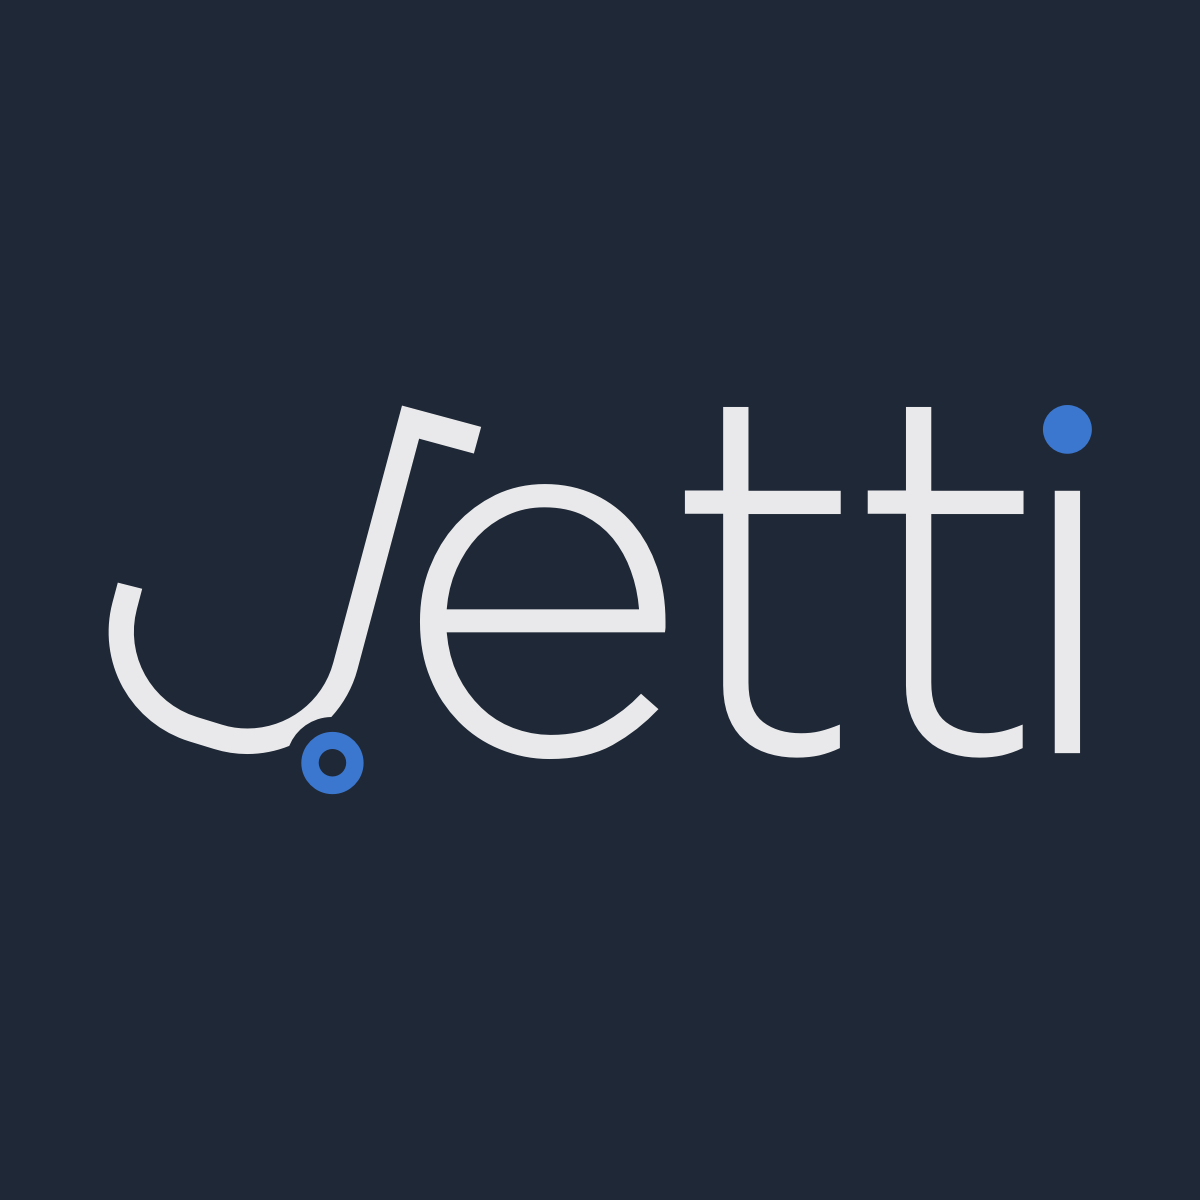 Hire Shopify Experts to integrate Jetti app into a Shopify store